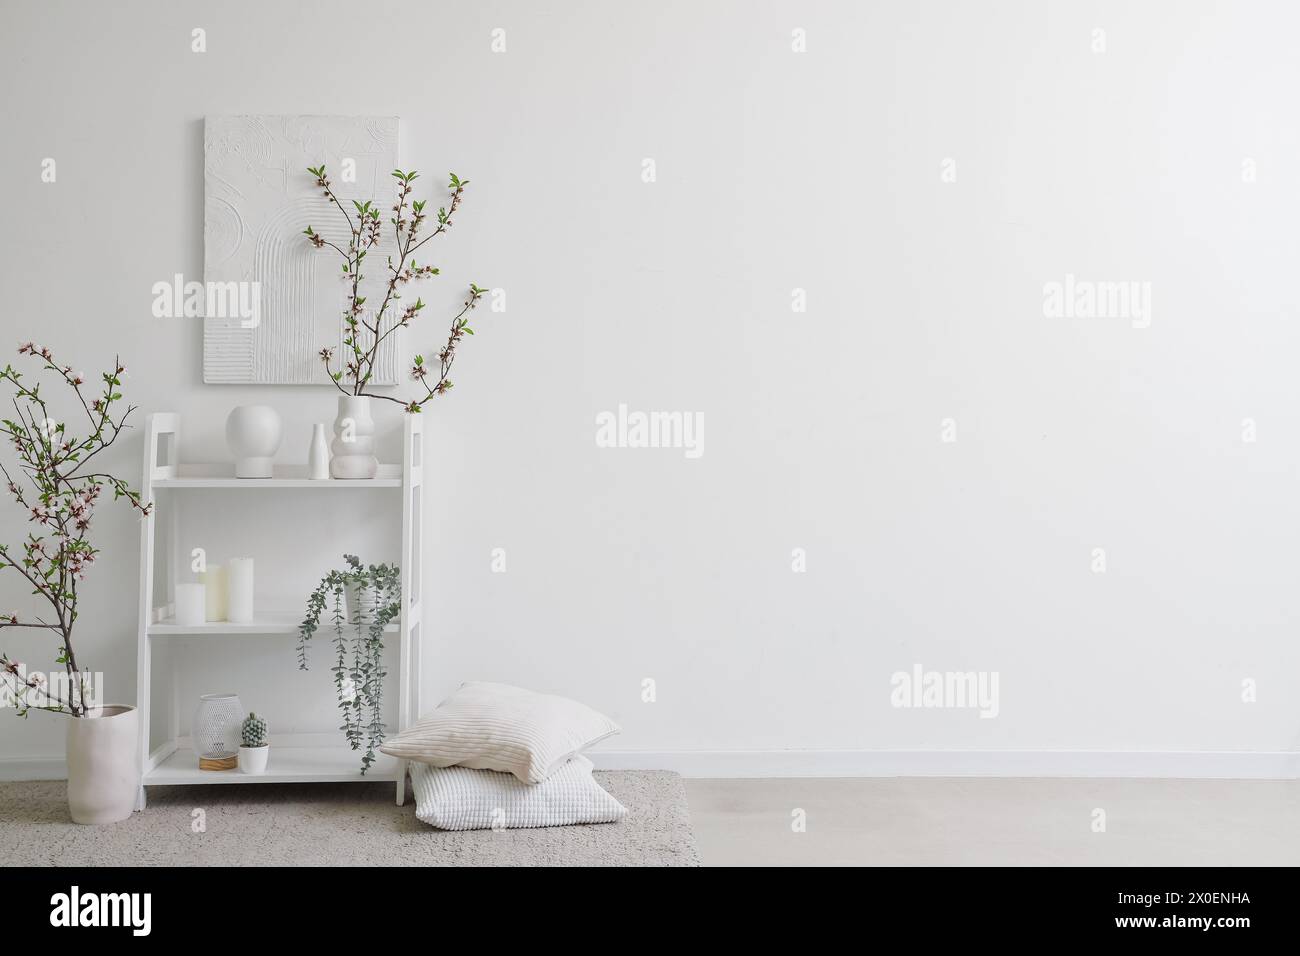 Vases with blooming branches and decor on shelving unit near white wall Stock Photo